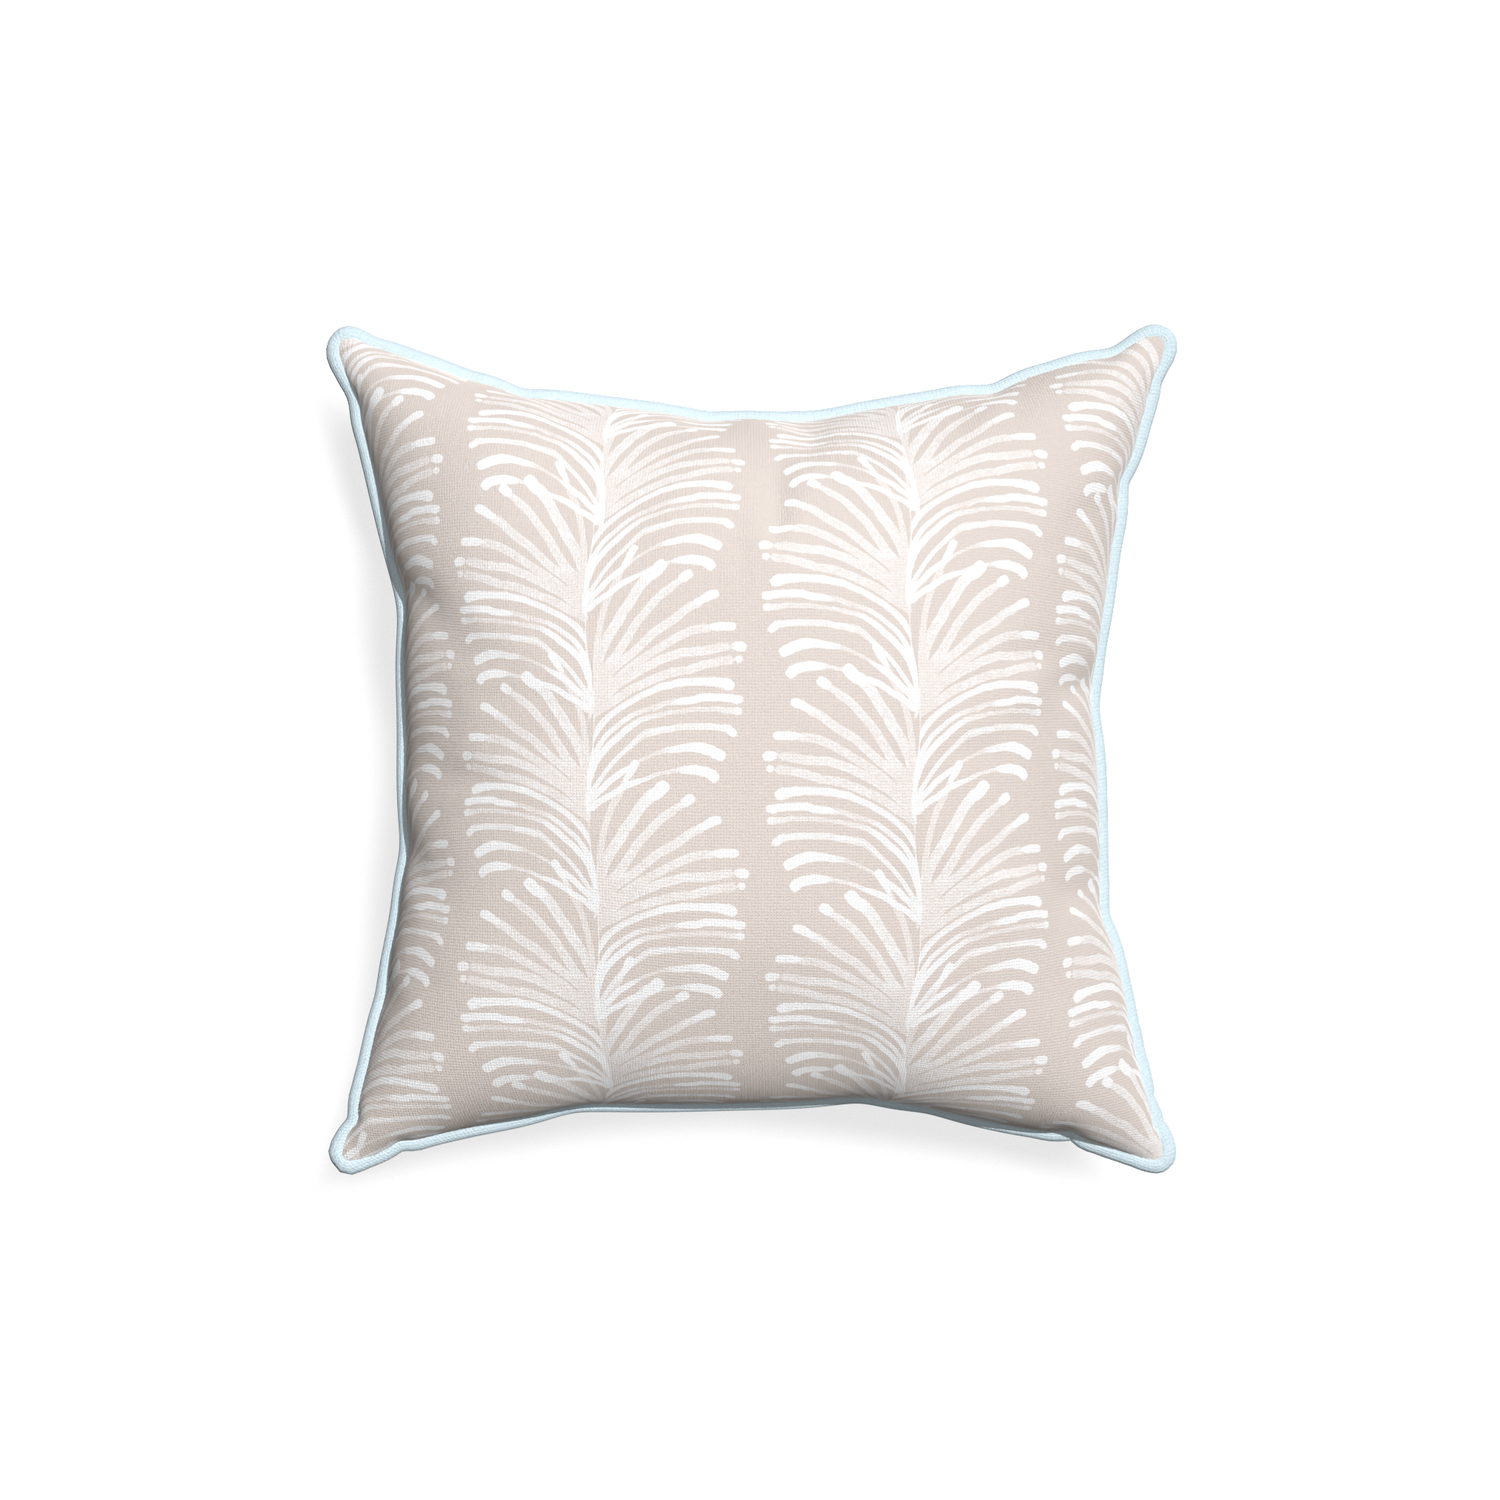 18-square emma sand custom sand colored botanical stripepillow with powder piping on white background